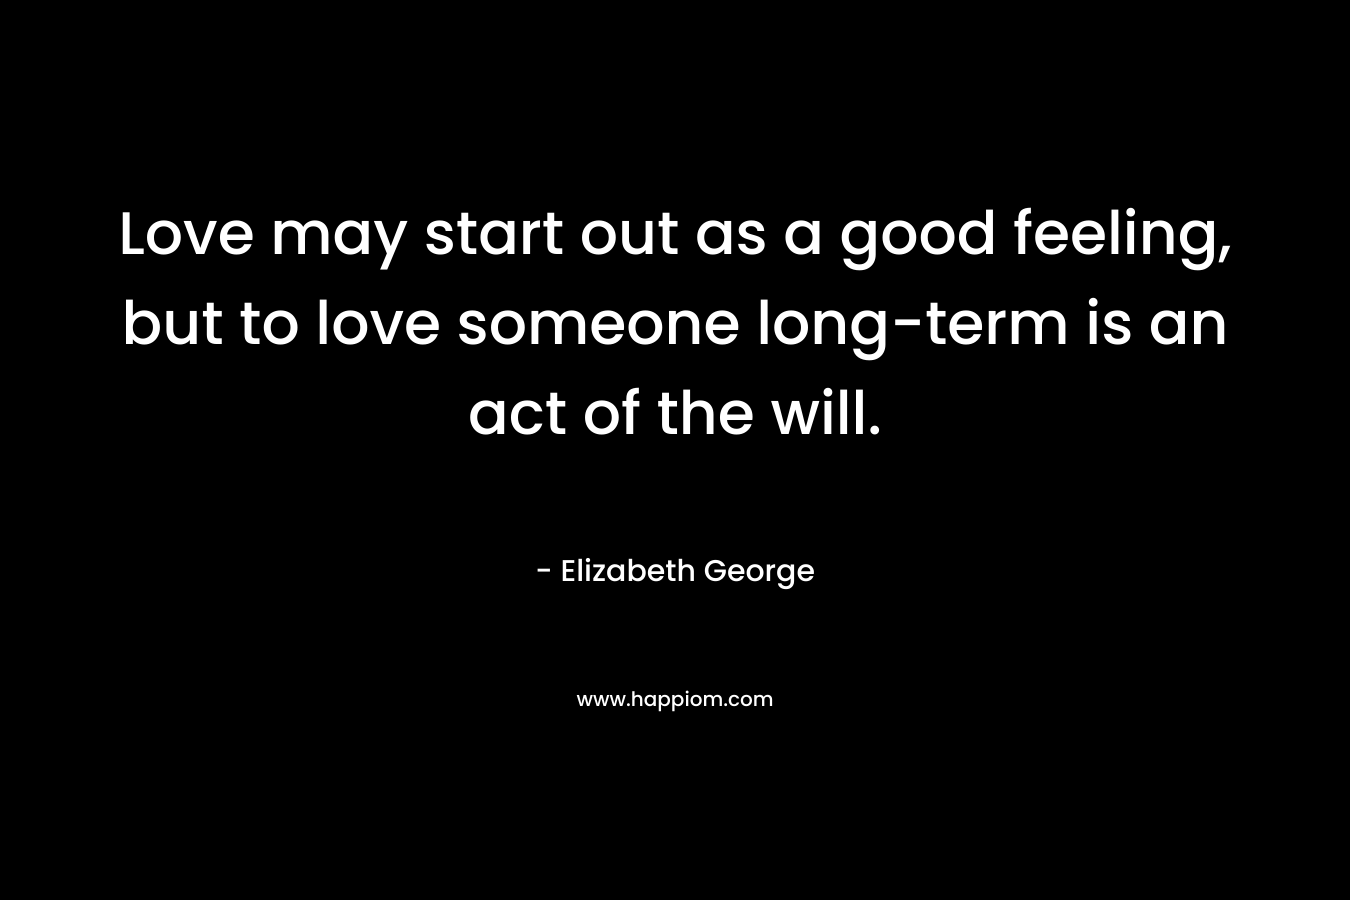 Love may start out as a good feeling, but to love someone long-term is an act of the will. – Elizabeth George